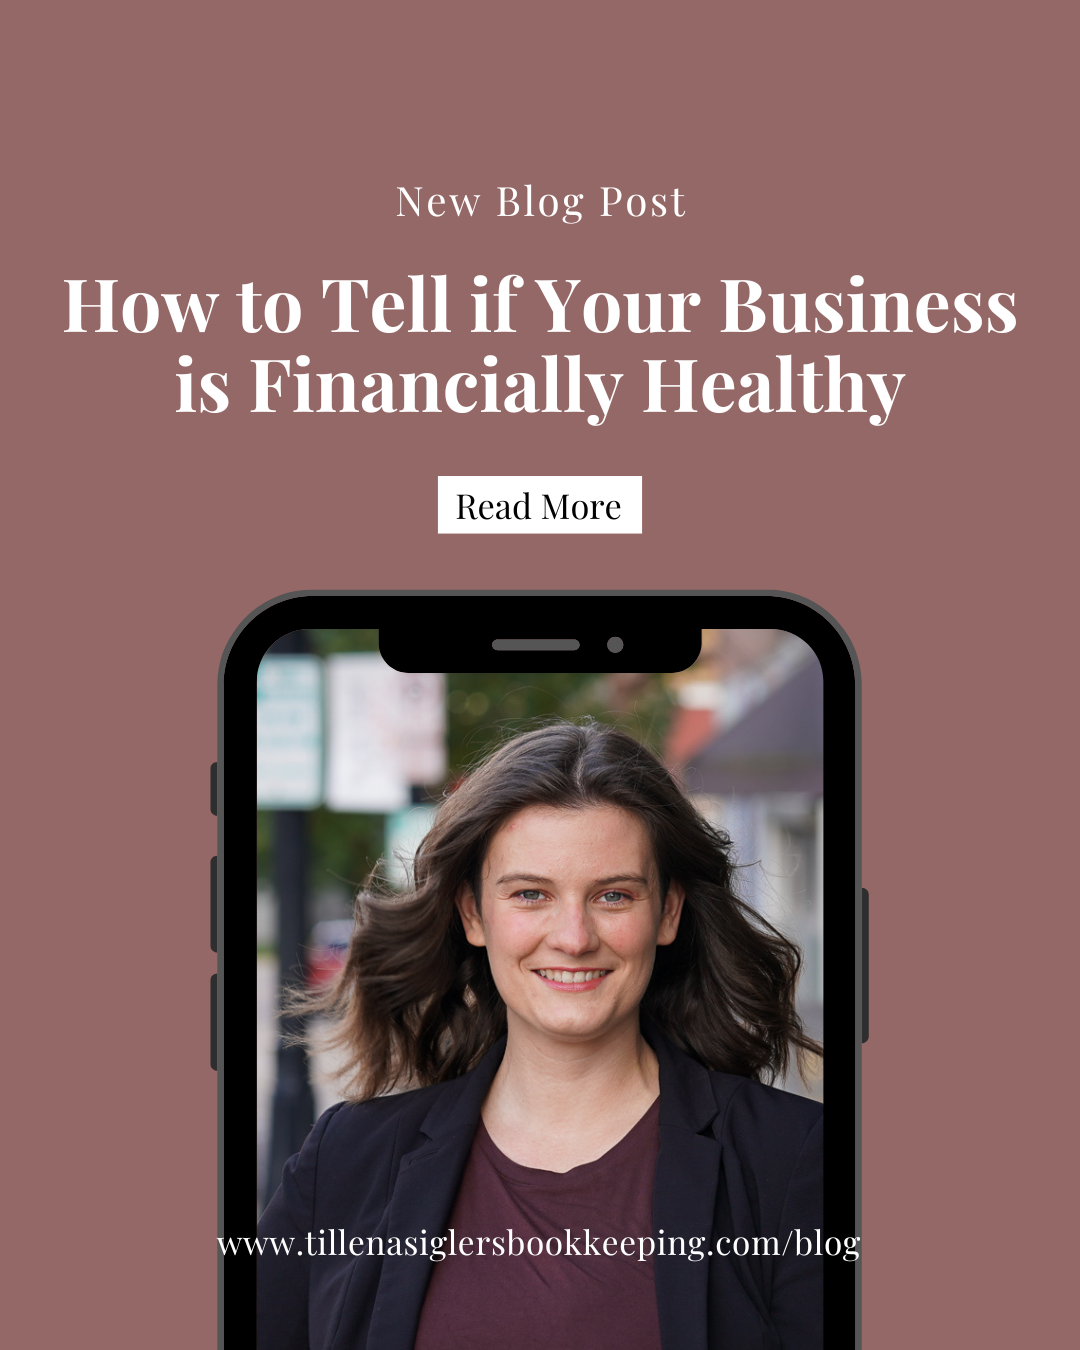 How to Tell if Your Business is Financially Healthy